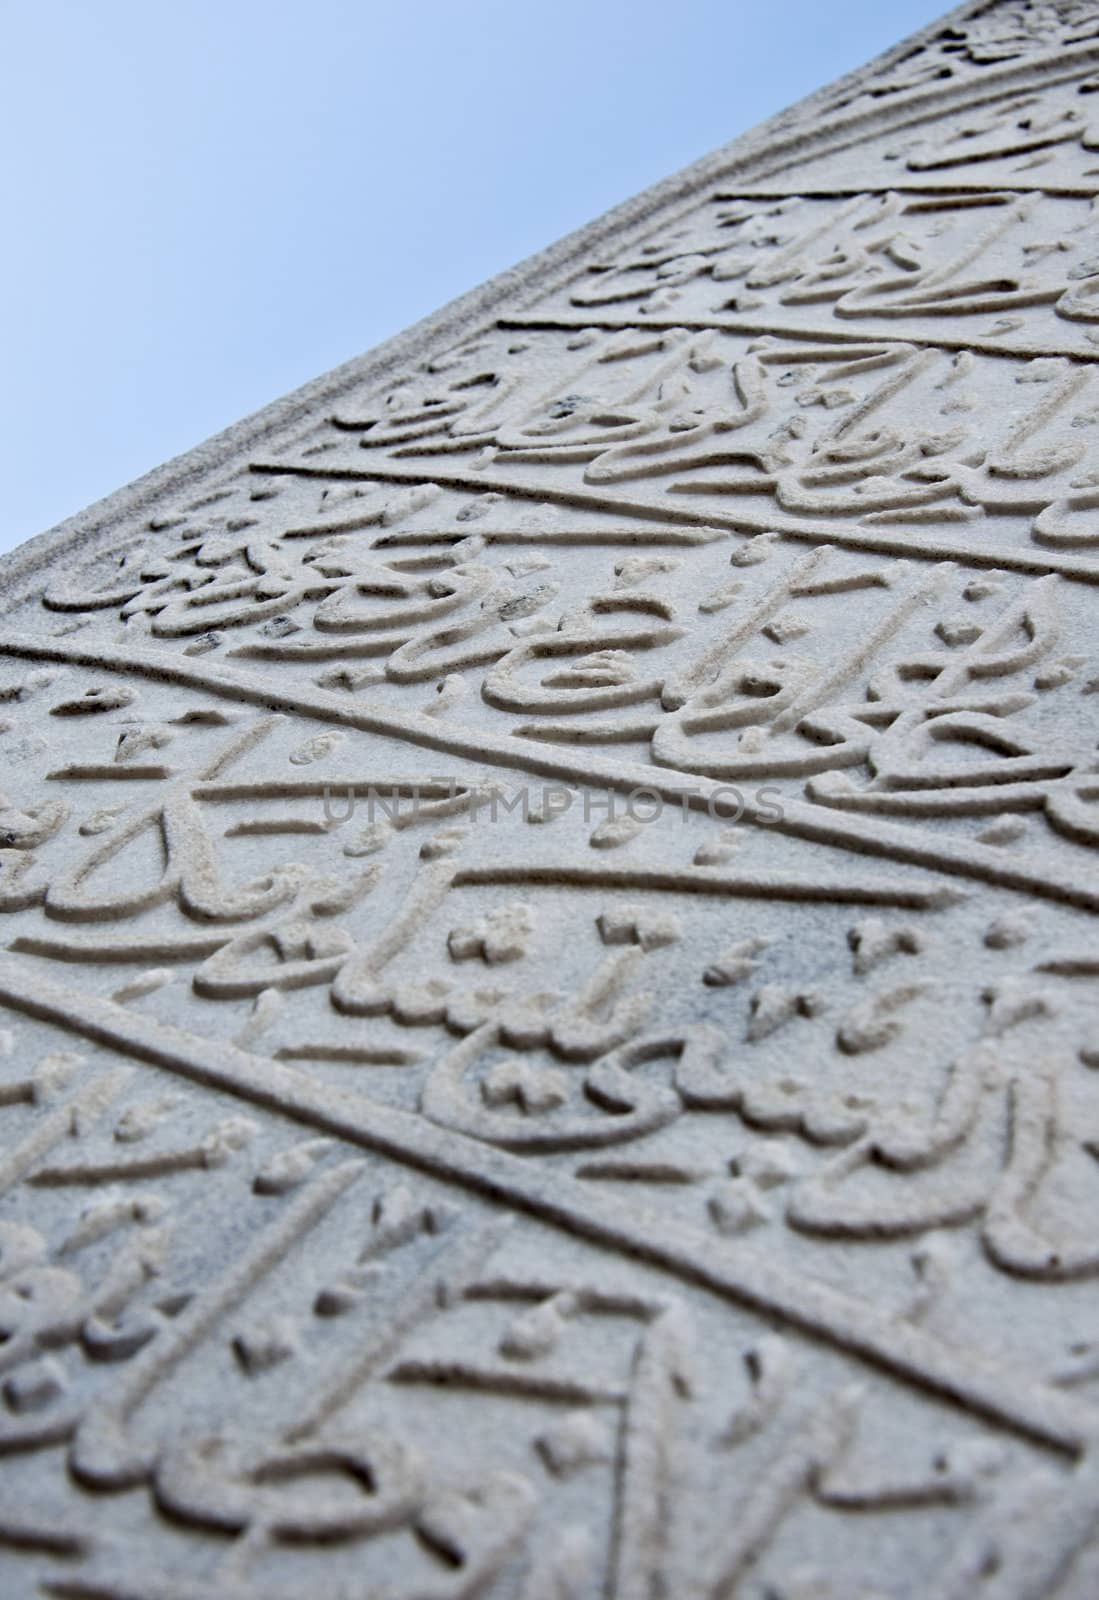 Detail of an old Ottoman-Turkish tomb stone with beautifully craved Arabic script